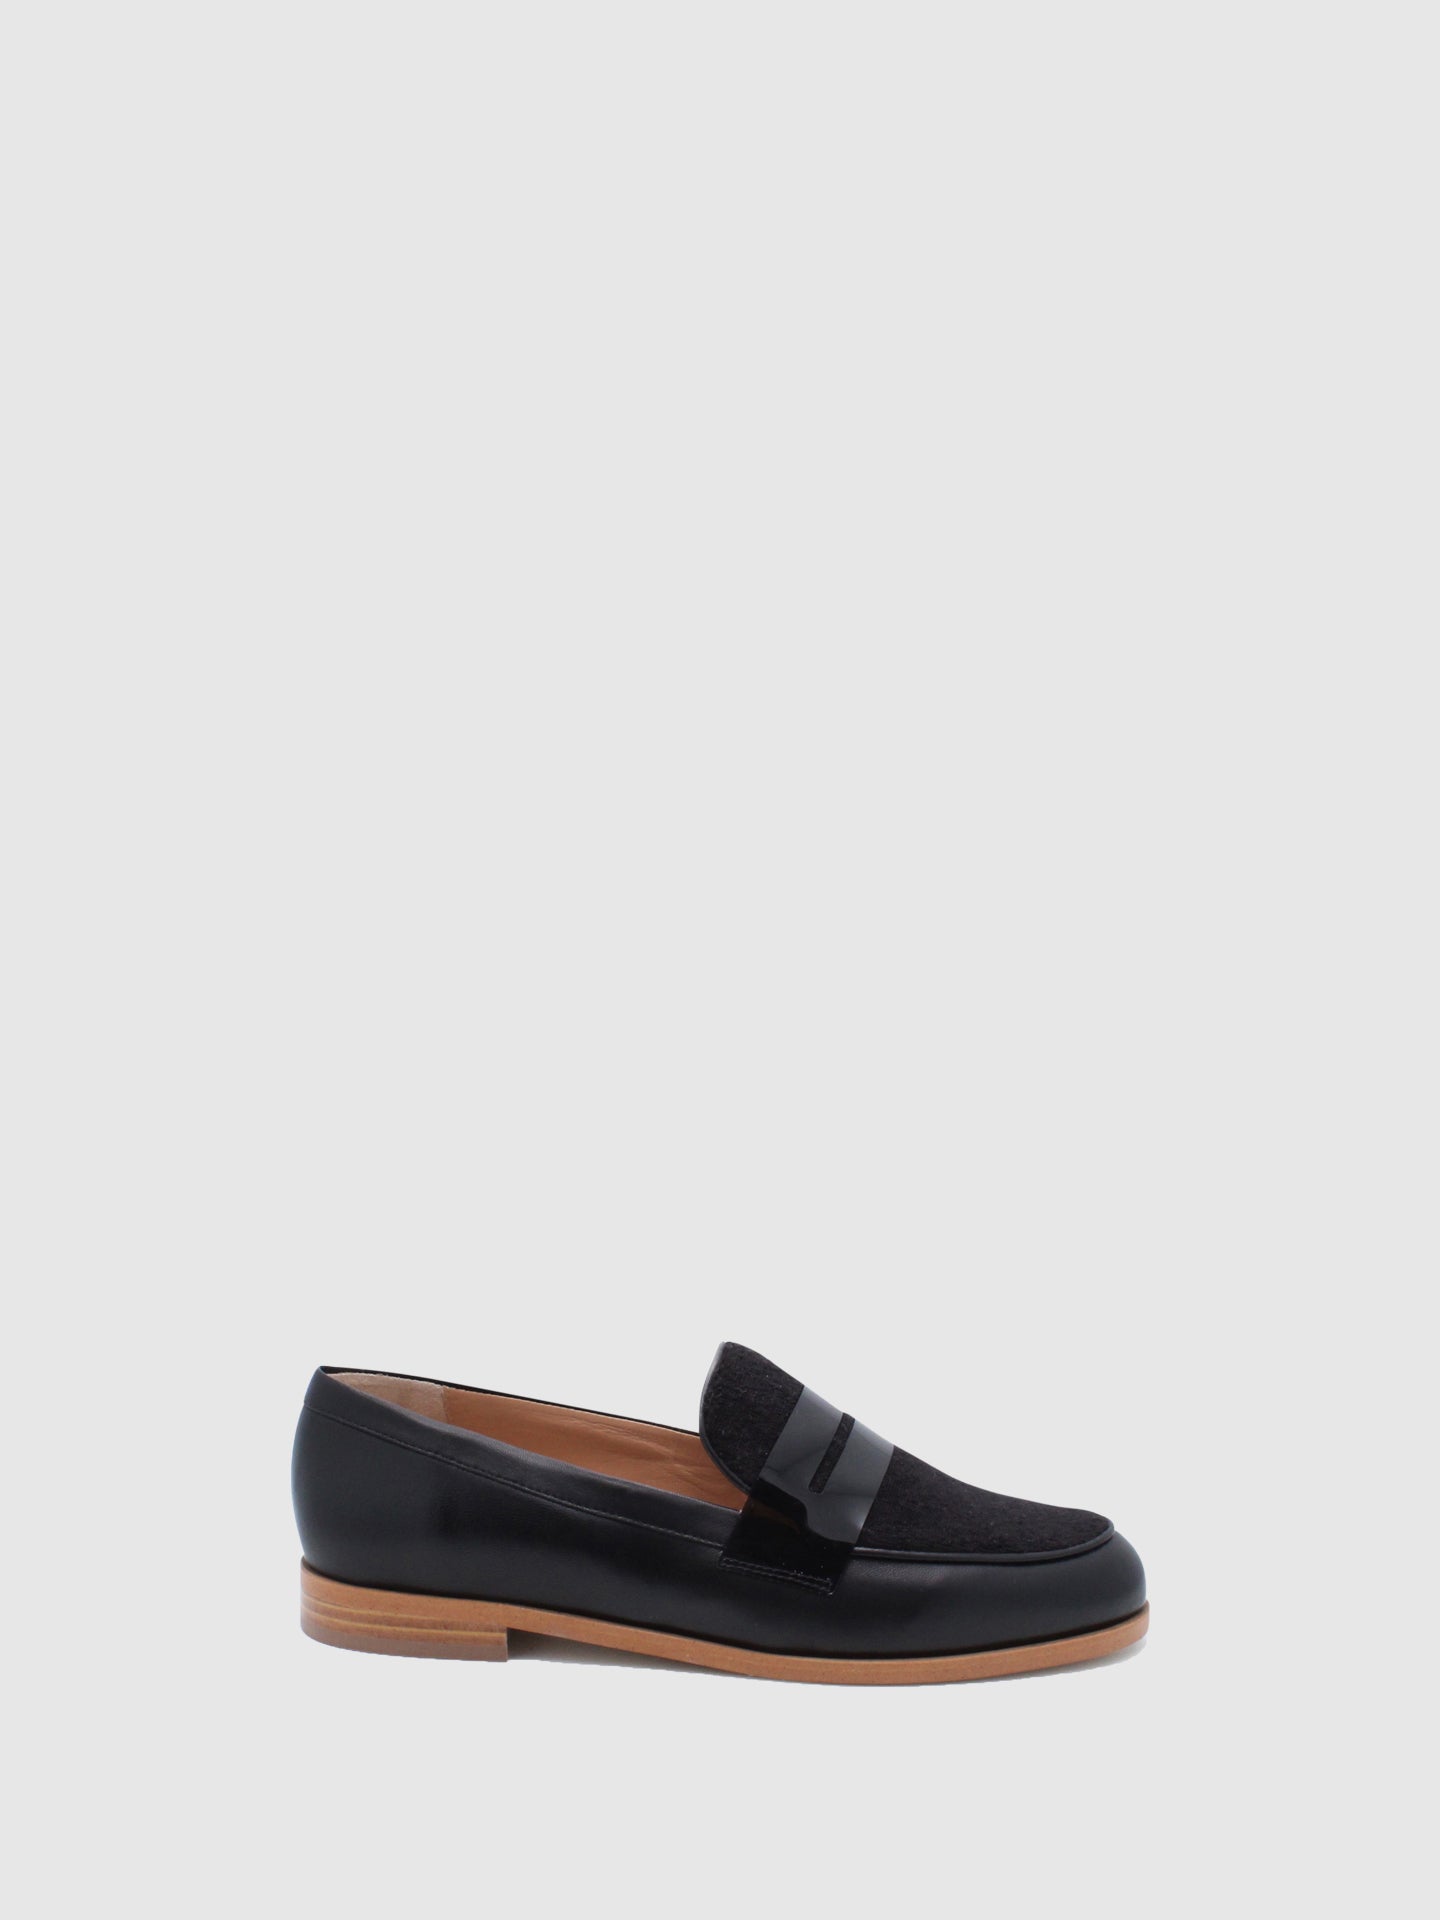 JJ Heitor Classic Loafers Impact Black